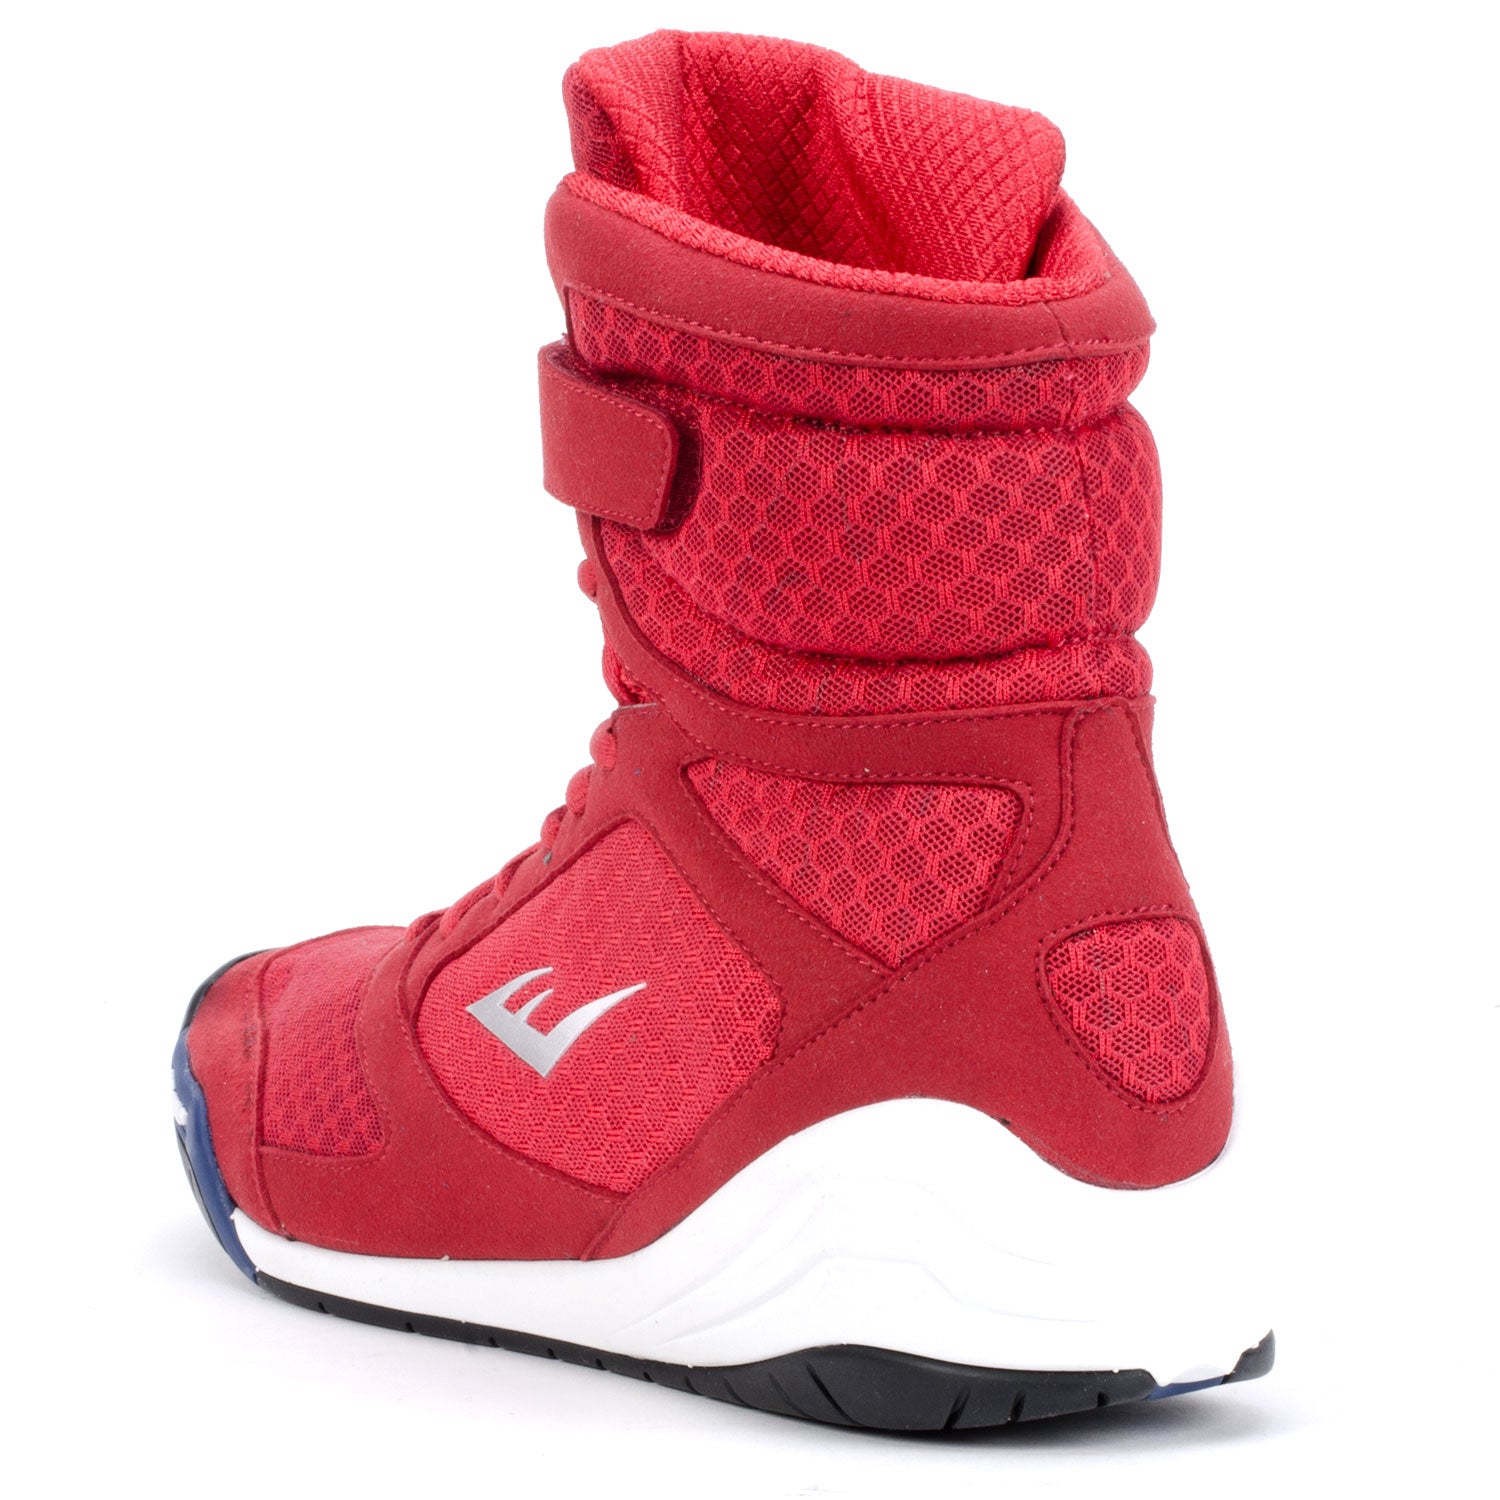 Everlast Elite Red High Top Boxing Shoe 